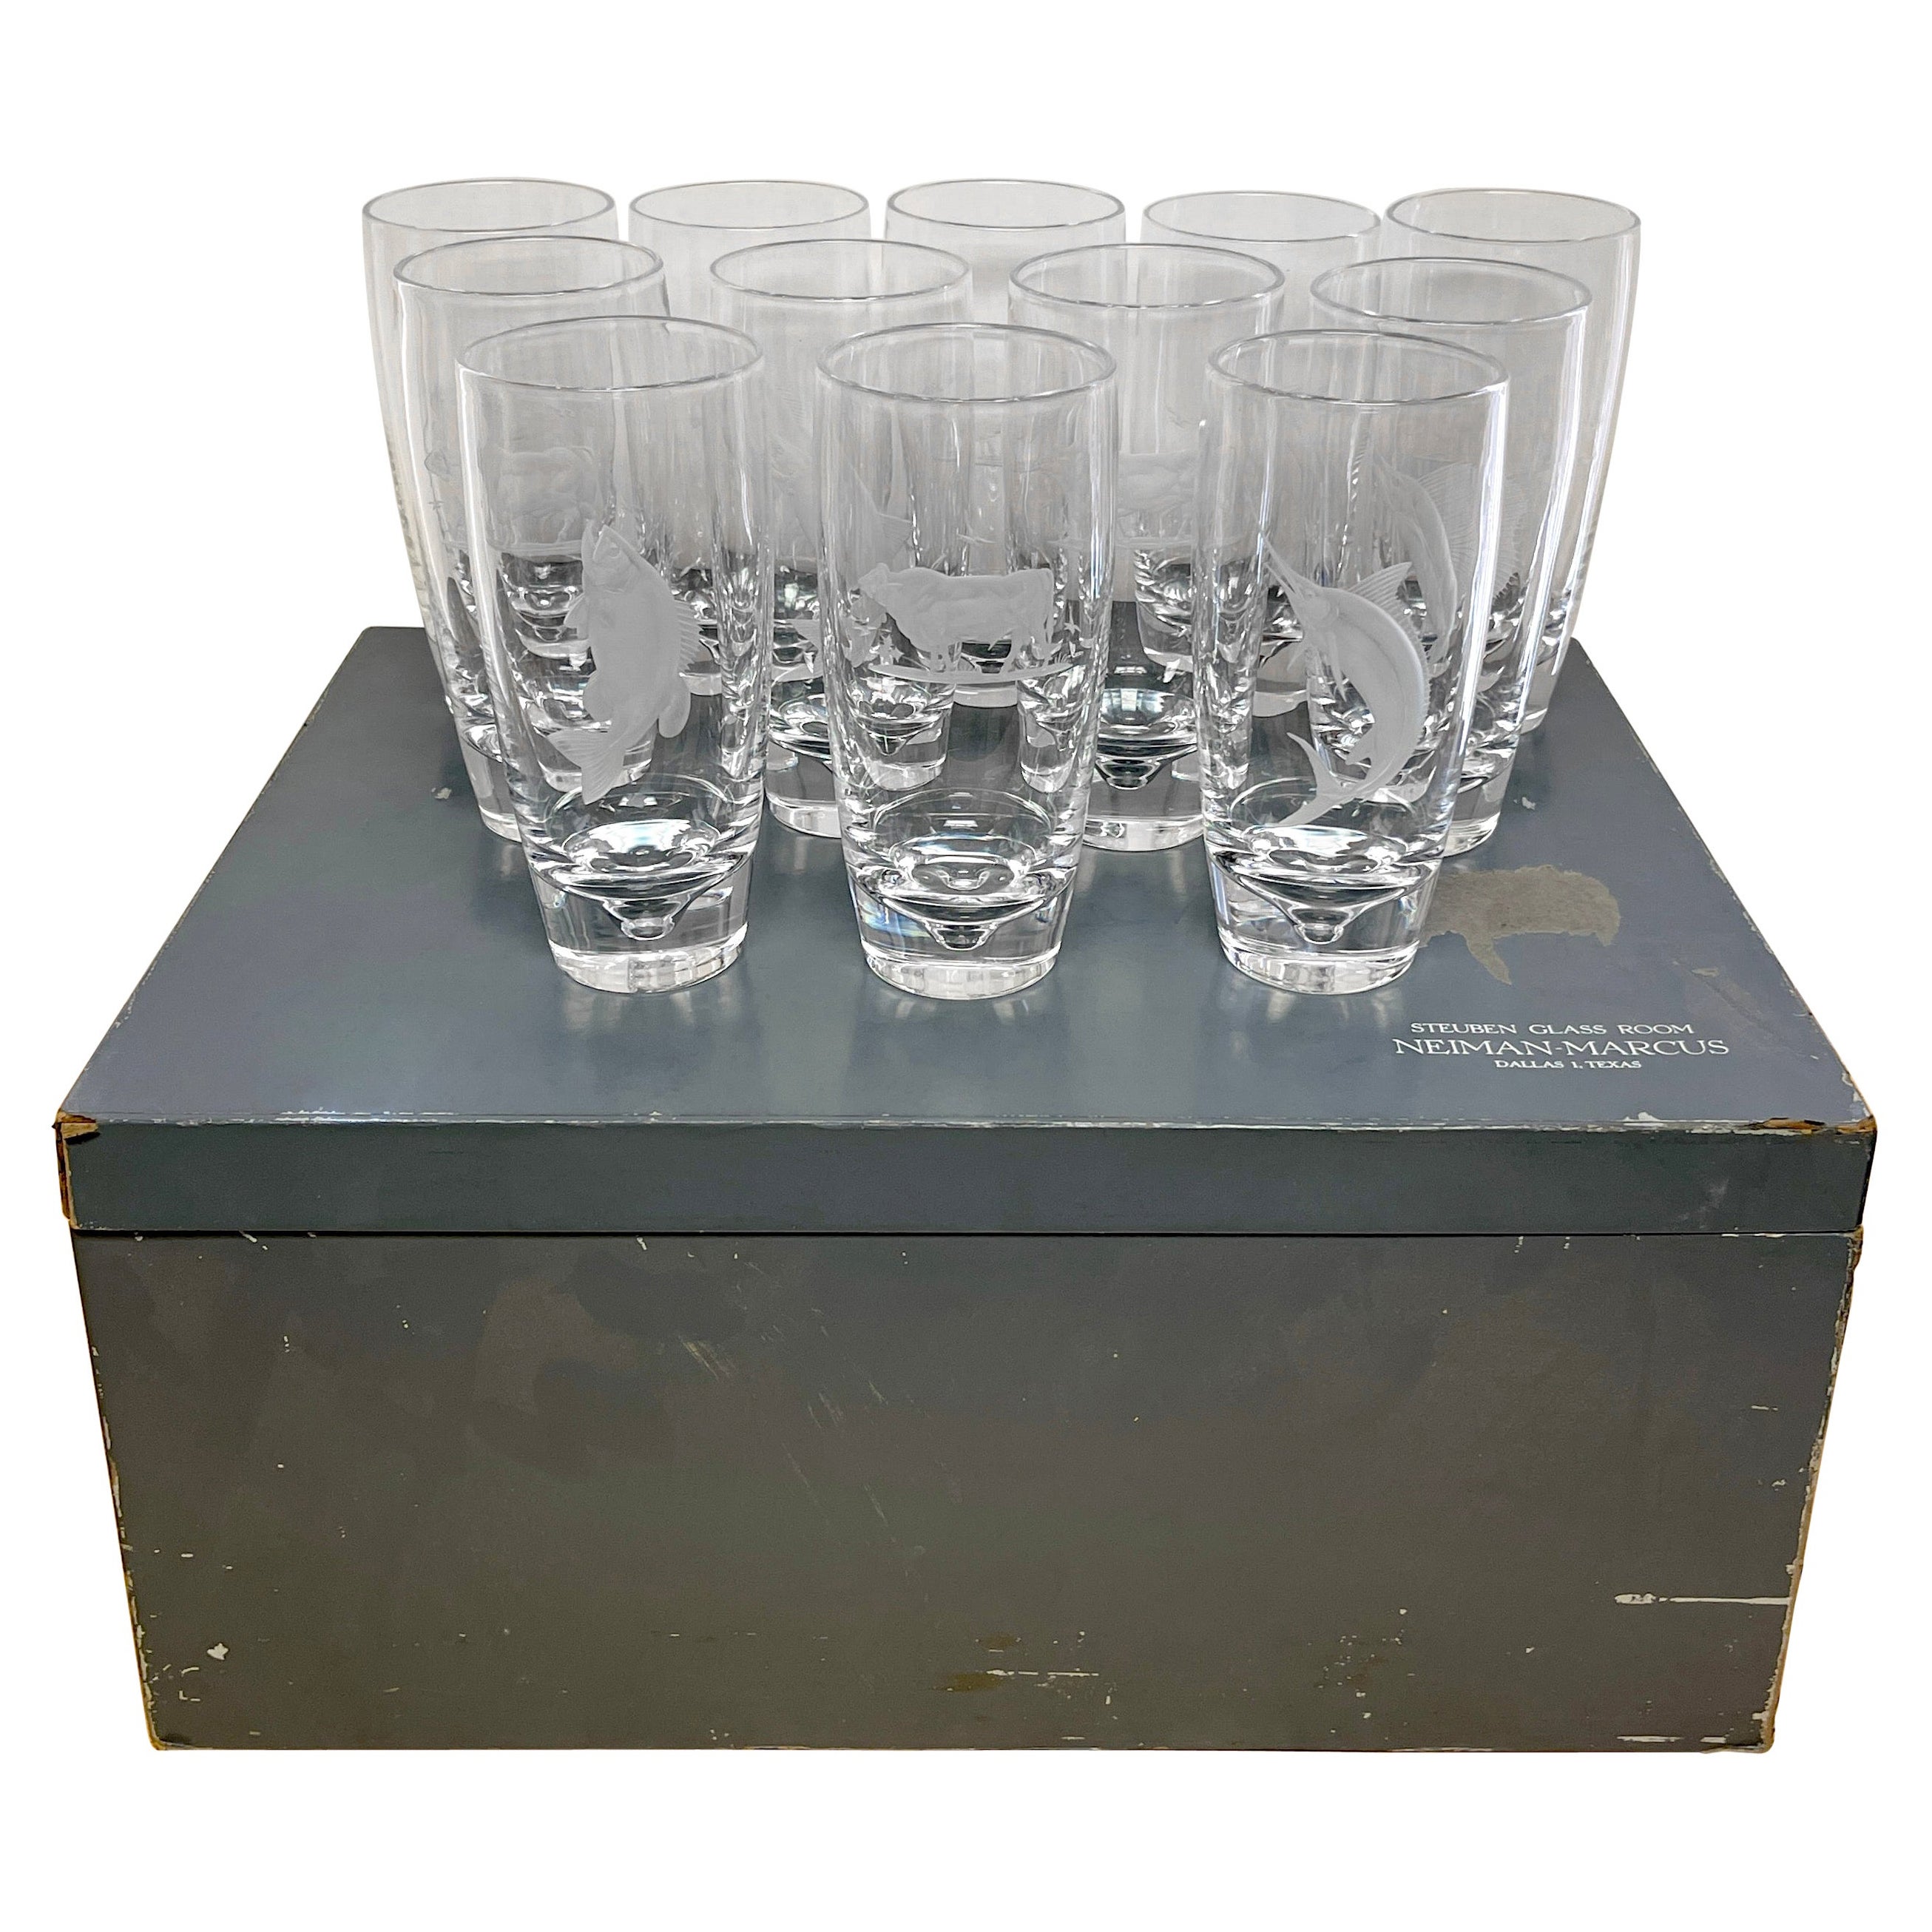 12 Steuben/ George Thompson Engraved Prized Bull & Game Fish Glasses For Sale